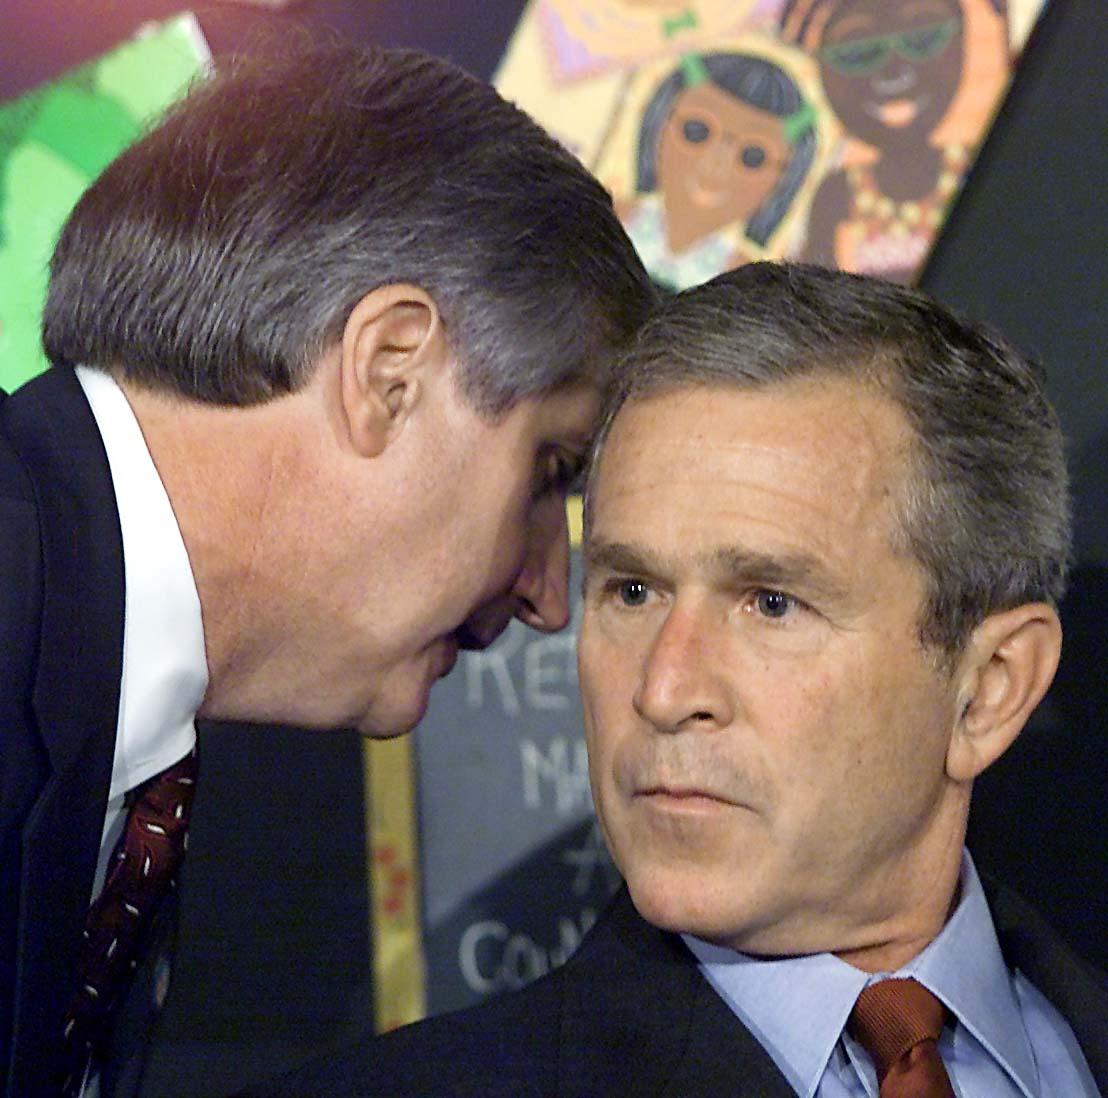 President George W. Bush (R) being informed by his chief of staff Andrew Card of the attacks on the World Trade Center in New York during an early morning school reading event in Sarasota, Florida, on Sept. 11, 2001. (Paul J. Richards/AFP/Getty Images)